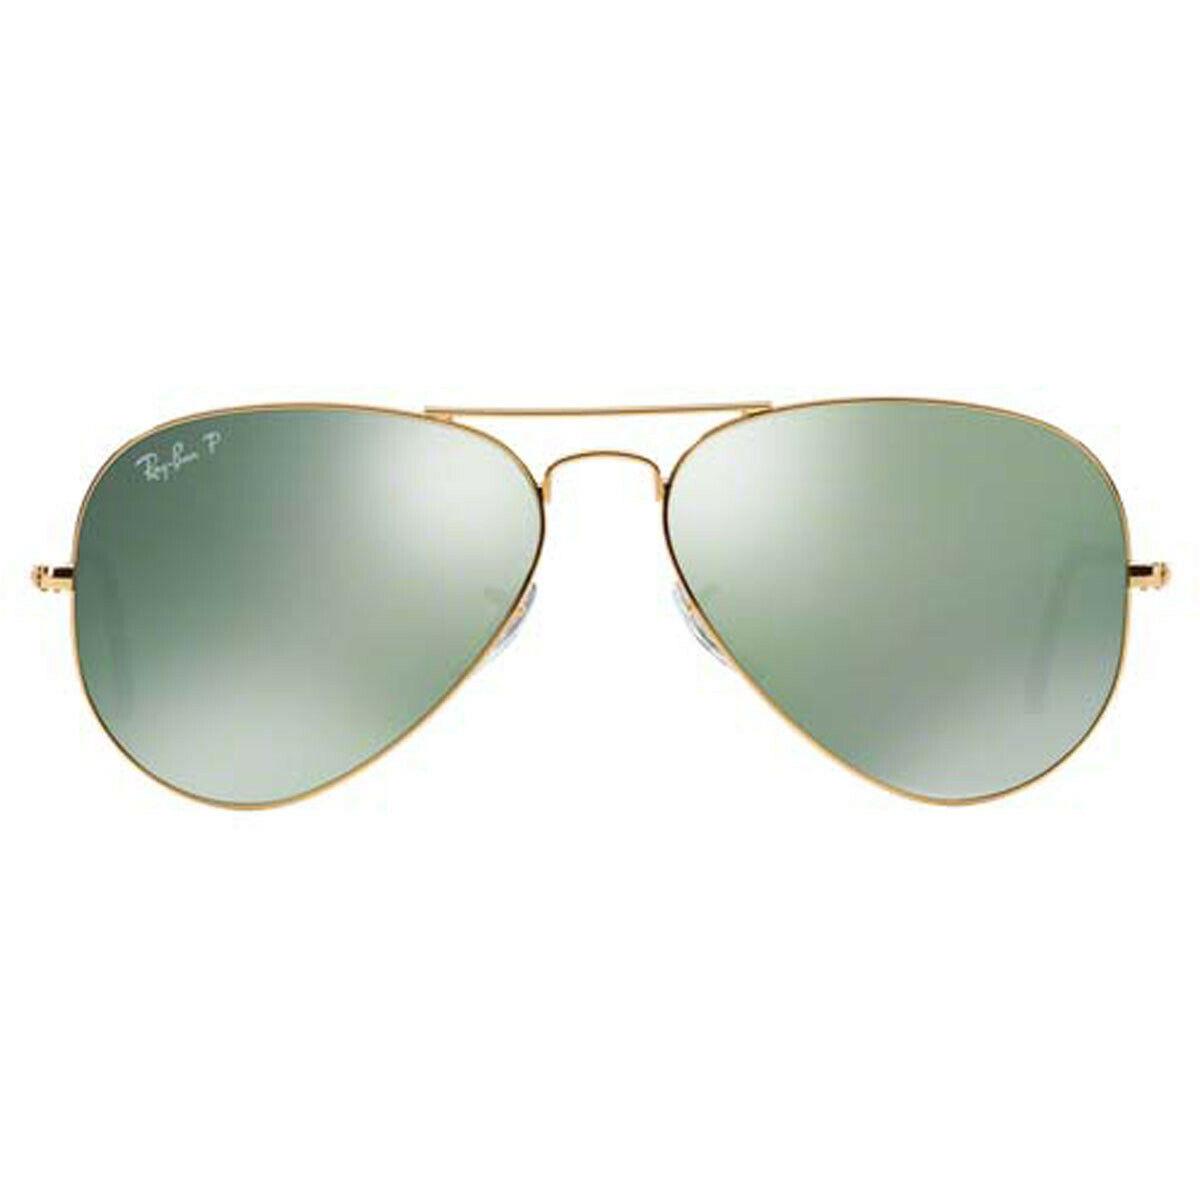 Ray-Ban sunglasses  - Gold Frame, Green Mirrored Lens 0